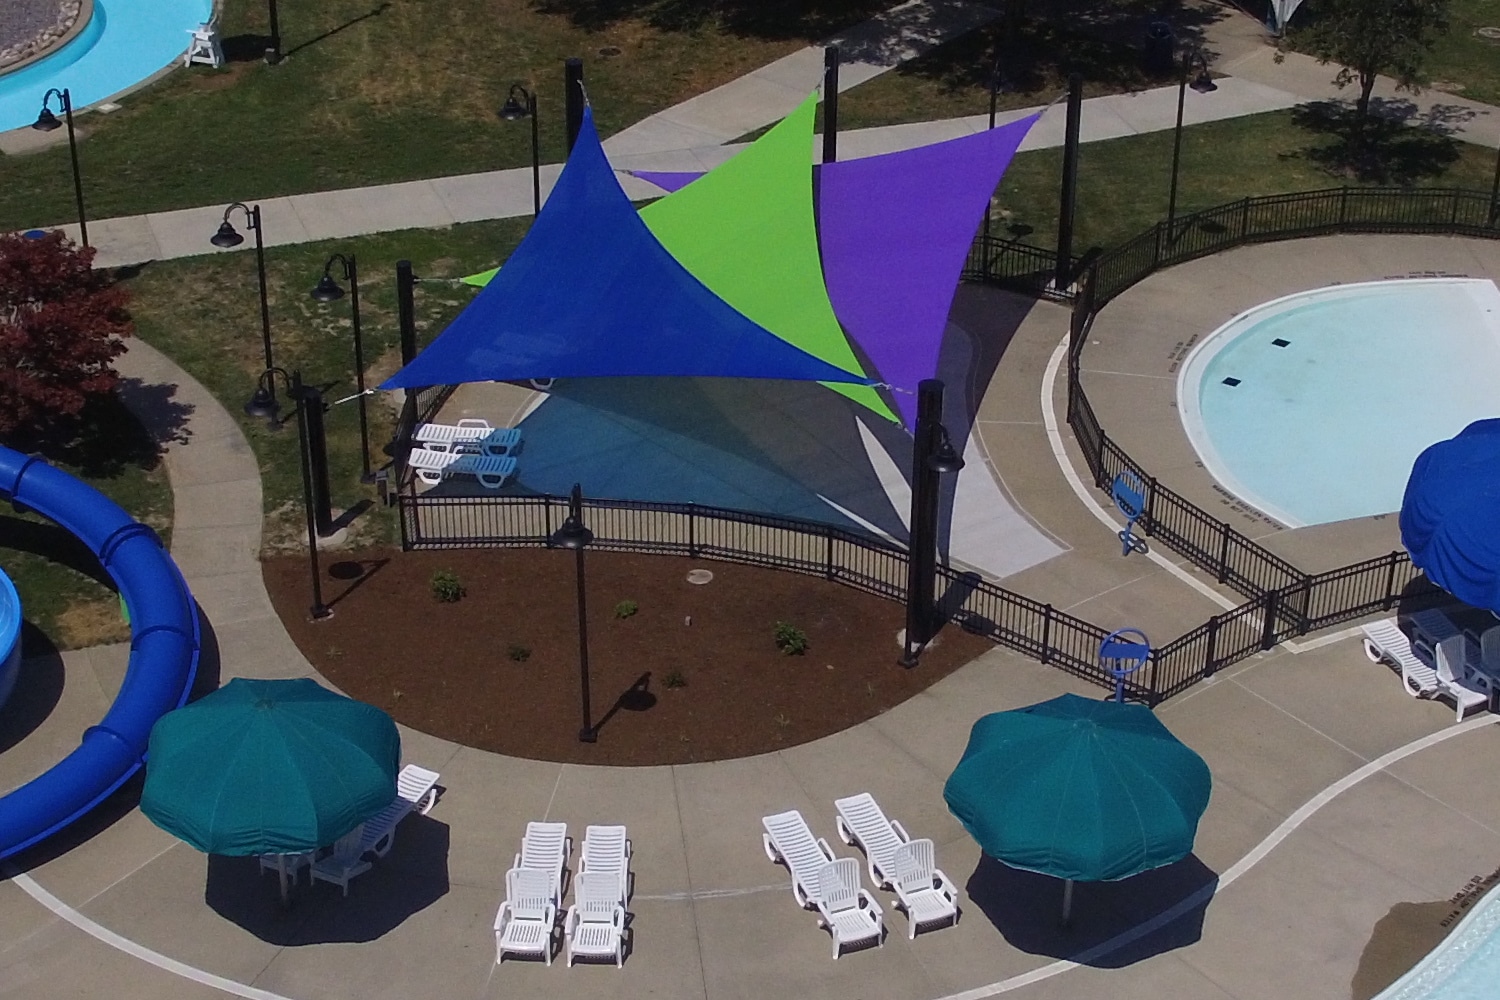 Blue, green and purple triangular sails shade an area at a pool park.